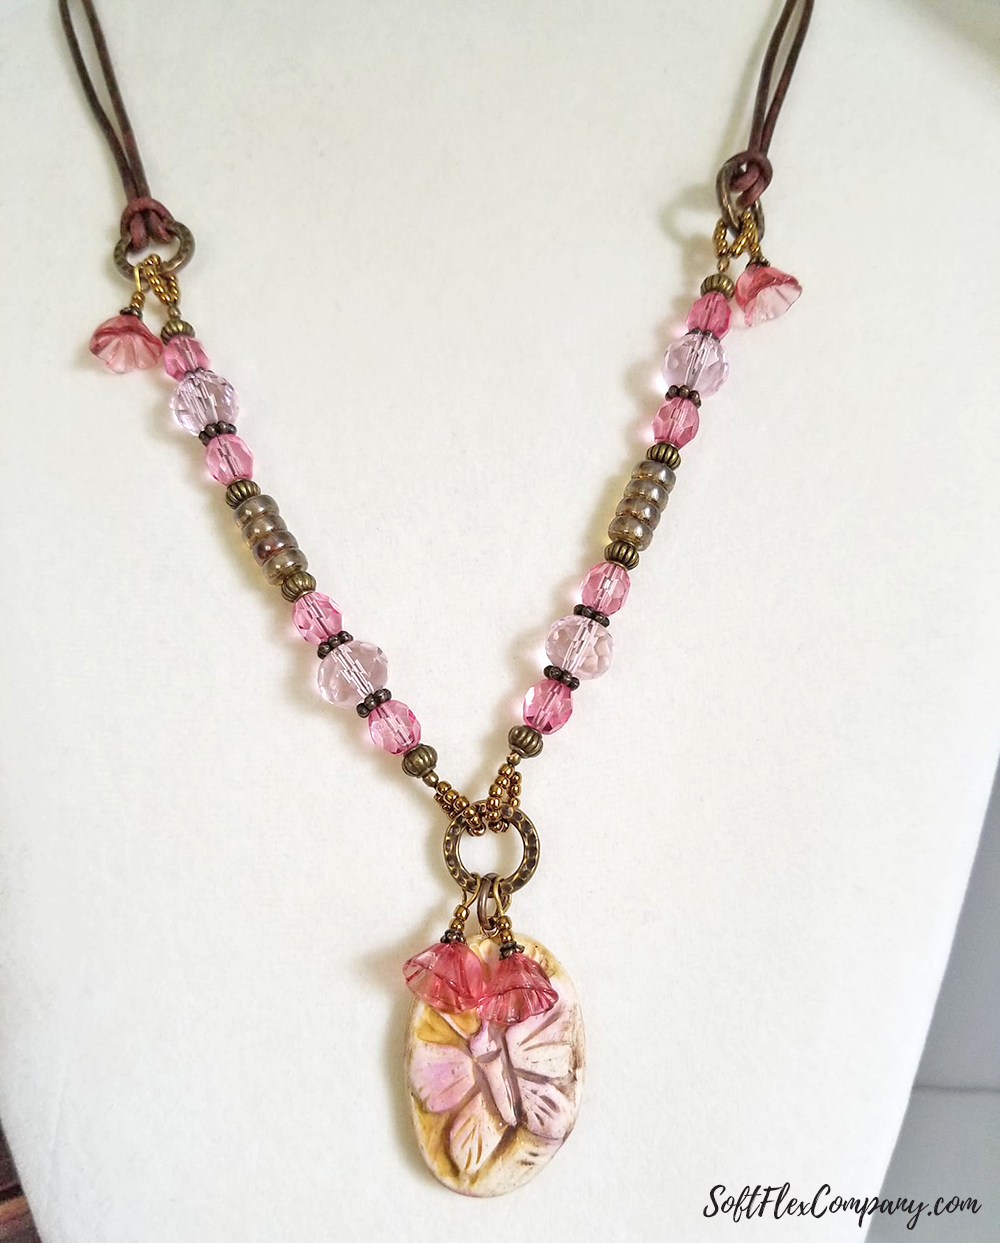 Cherry Blossoms Jewelry by Laurena Whitwer